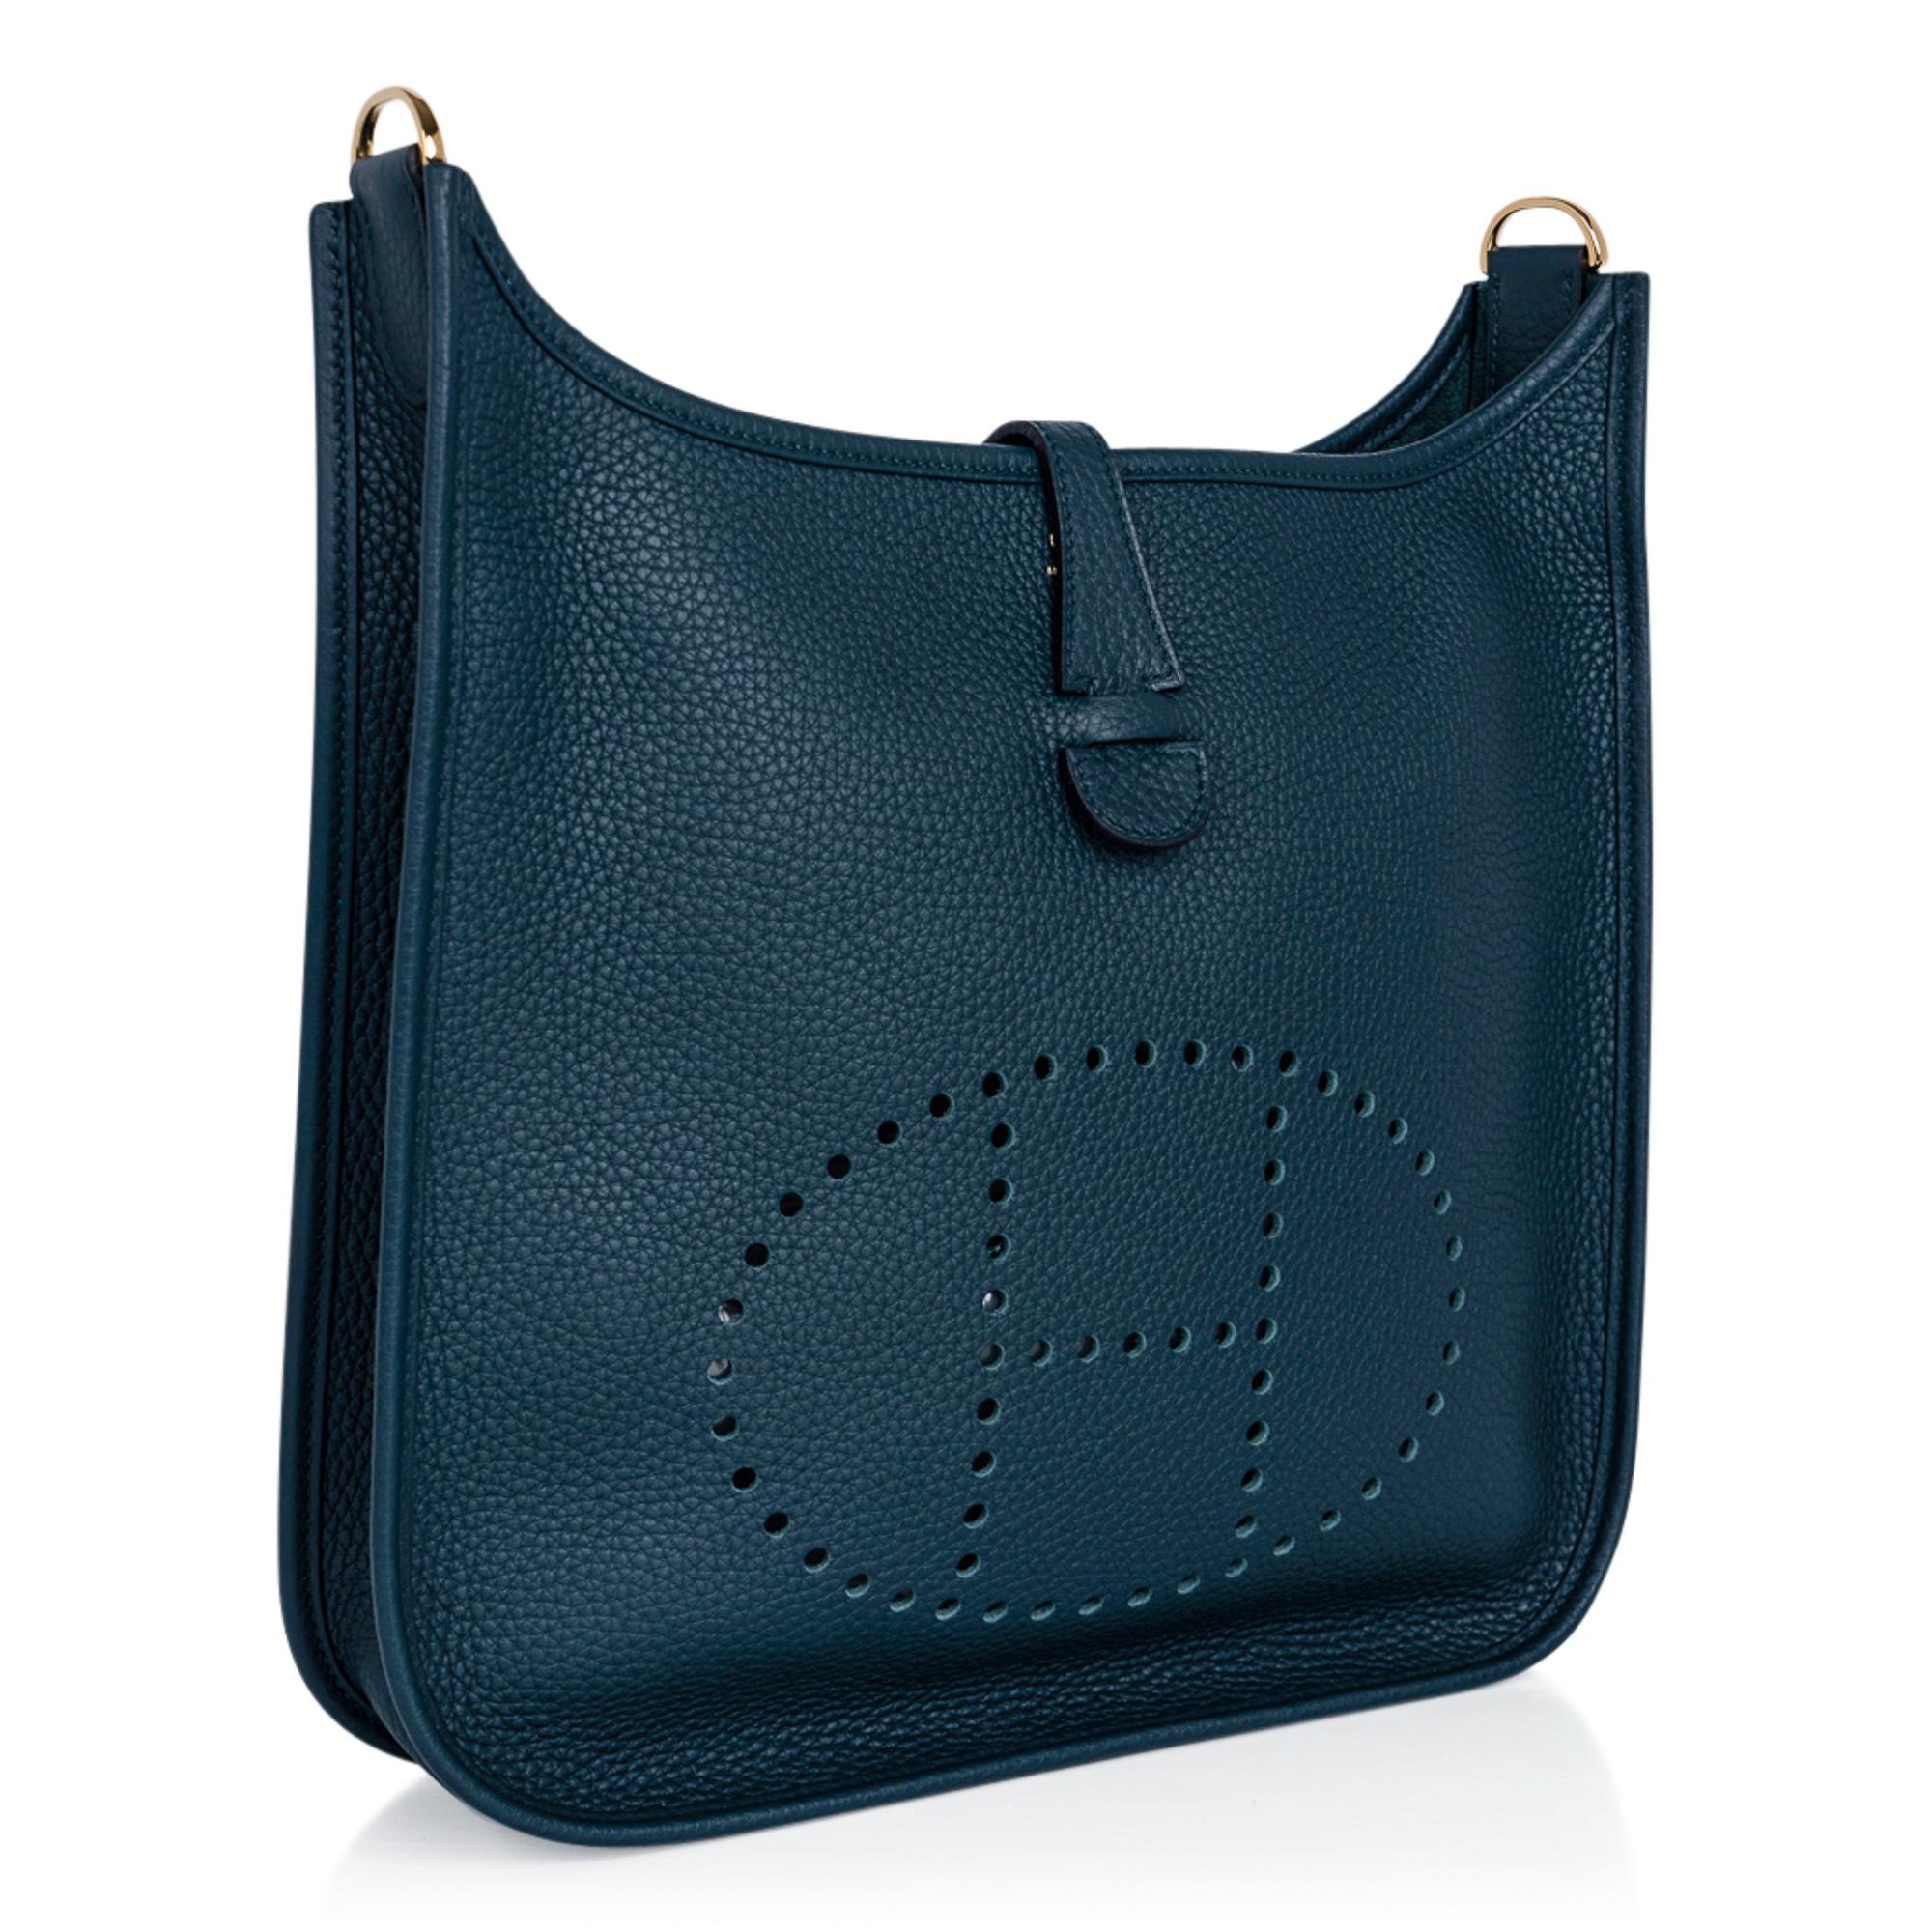 Guaranteed authentic Hermes Evelyne PM featured in lush Vert Cypress.
Rich with gold hardware.
Plush clemence leather.
Fabulous shoulder or crossbody bag with roomy interior and rear outside deep pocket. 
Sport strap in textile with leather and